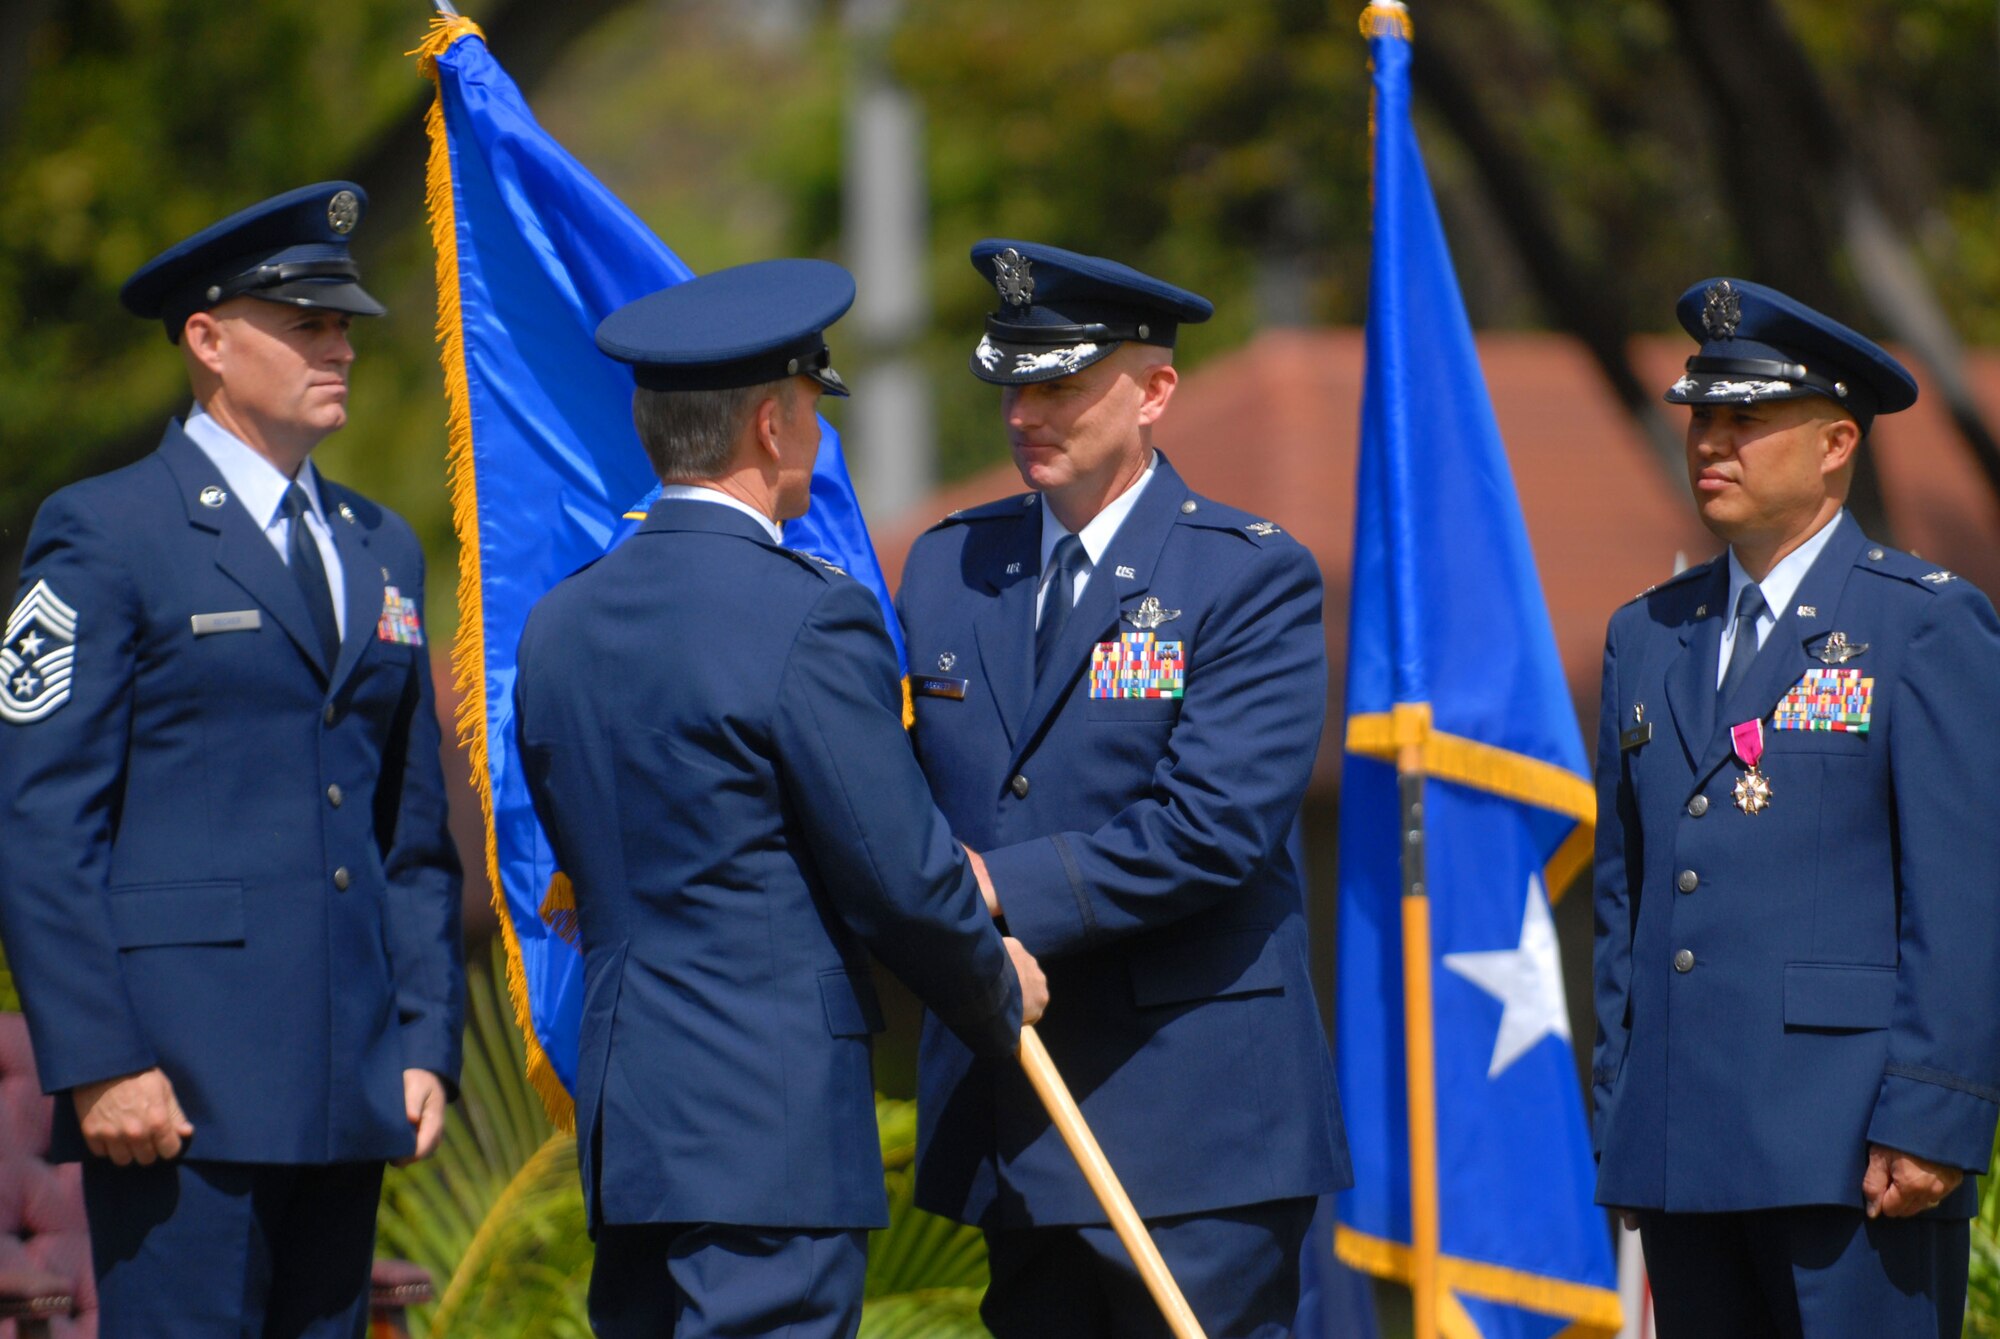 JOINT BASE PEARL HARBOR HICKAM, Hawaii - Col. Sam Barrett assumes command of the 15th Wing during the 15th Wing change of command here, May 18. The change of command also included a re-designation from the 15th Airlift Wing to the 15th Wing and remains assigned to the 13th Air Force. The re-designation reflects the mission change of the 15th Wing that will activate an active duty F-22 squadron and KC-135 squadron this summer. (U.S. Air Force photo/Senior Airman Gustavo Gonzalez) 